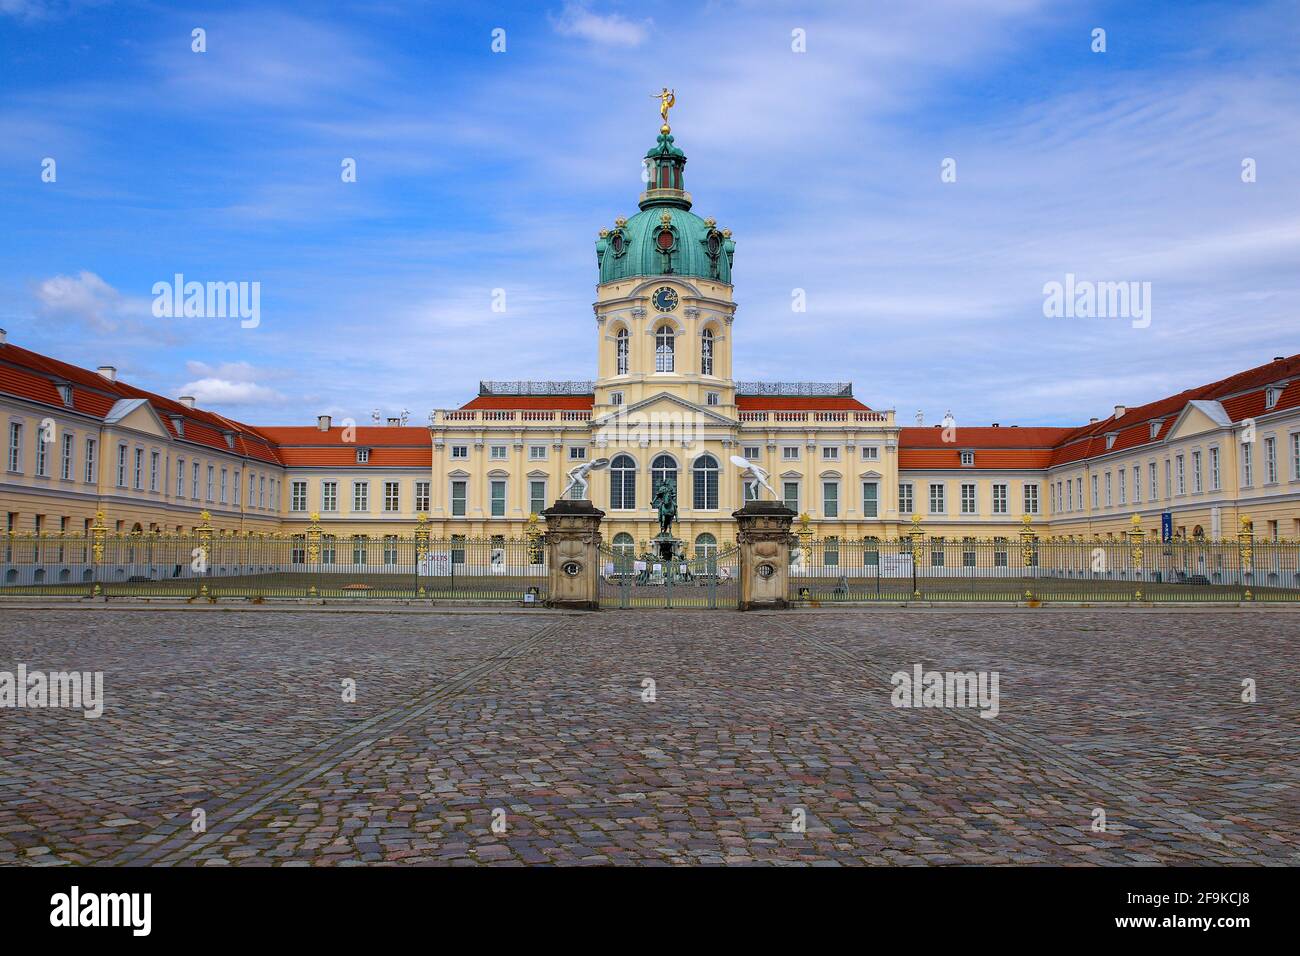 Berlin, Germany - April 16, 2021: A frontal view of the Charlottenburg Palace in Berlin, Germany. Stock Photo